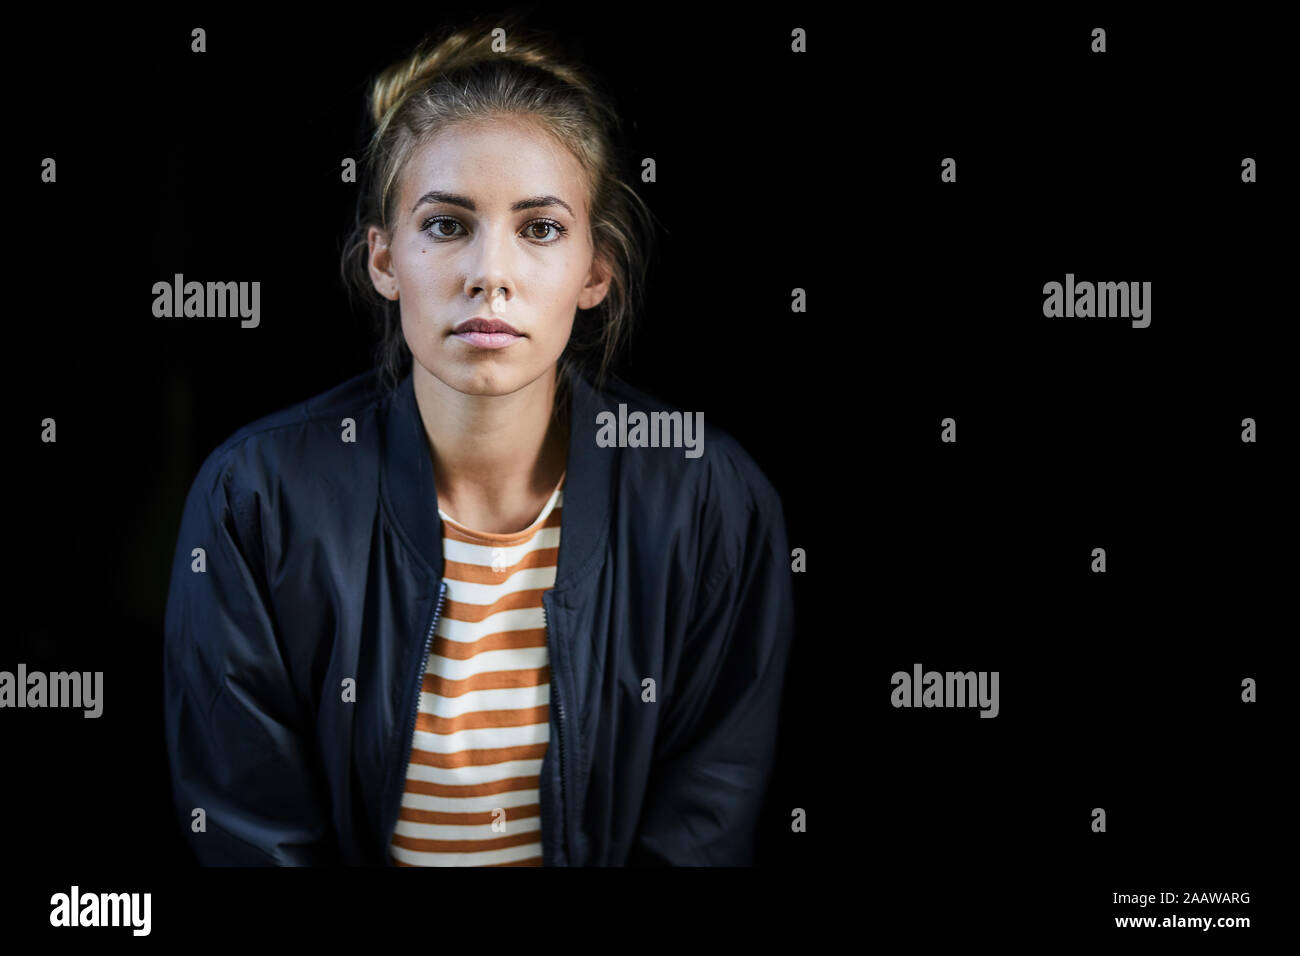 Portrait of a young woman in front of a black background Stock Photo